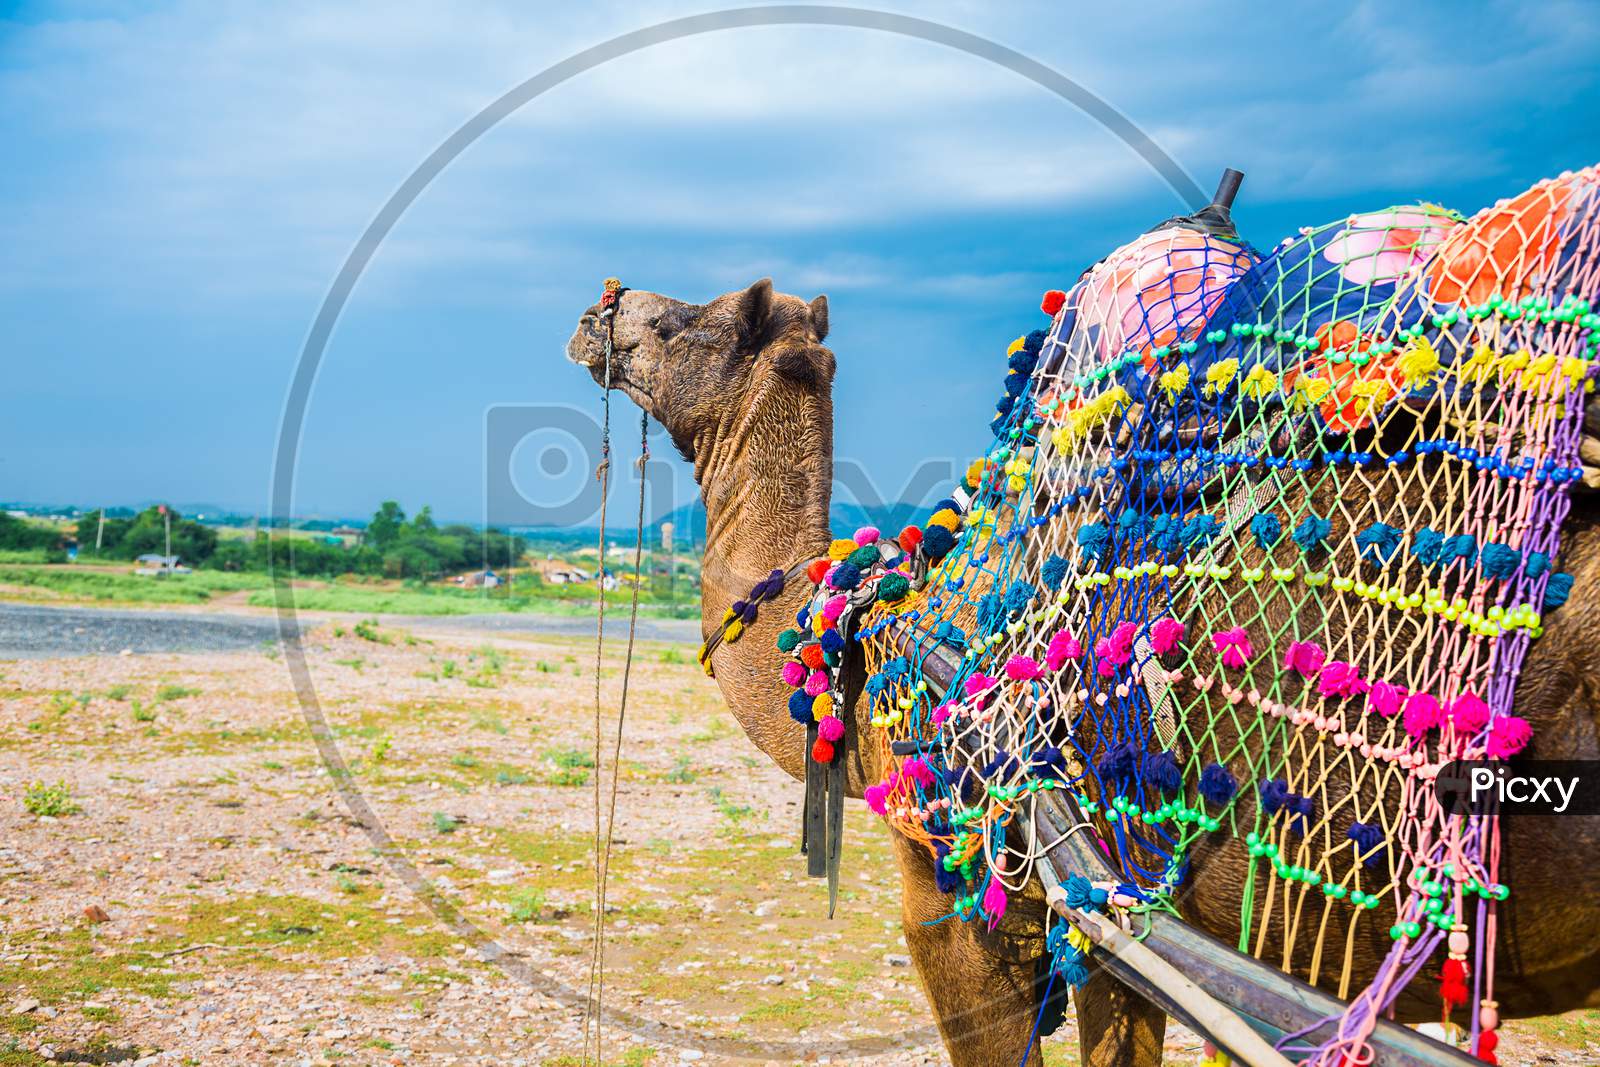 A Domestic Indian Decorated Camel, Standing On Sand In Middle Of Desert Against Cloudy Blue Sky.